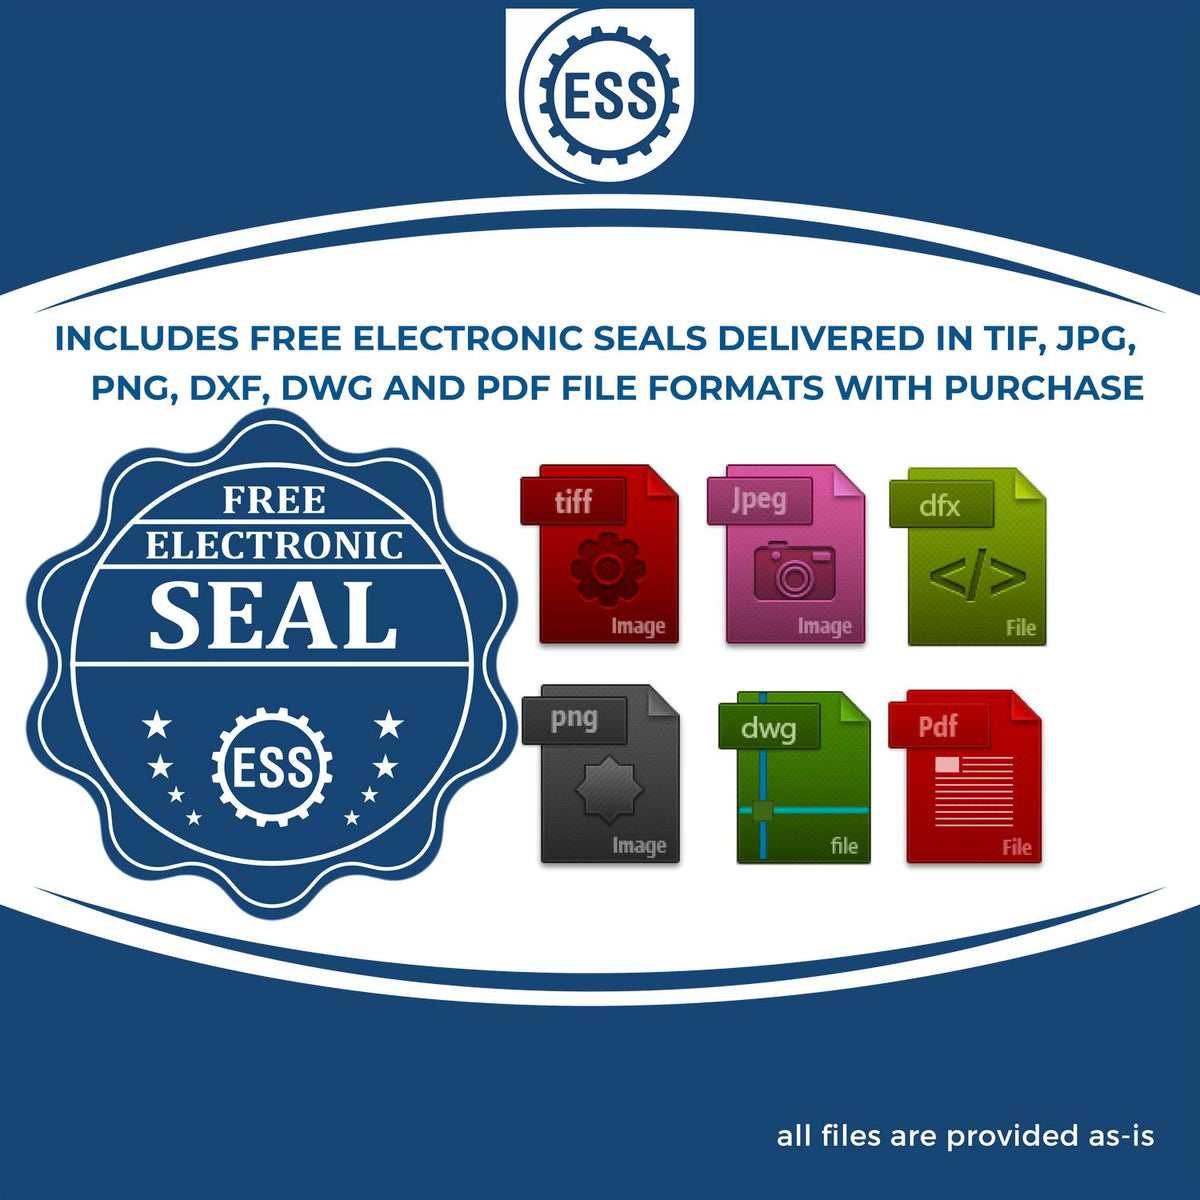 An infographic for the free electronic seal for the Arkansas Professional Geologist Seal Stamp illustrating the different file type icons such as DXF, DWG, TIF, JPG and PNG.